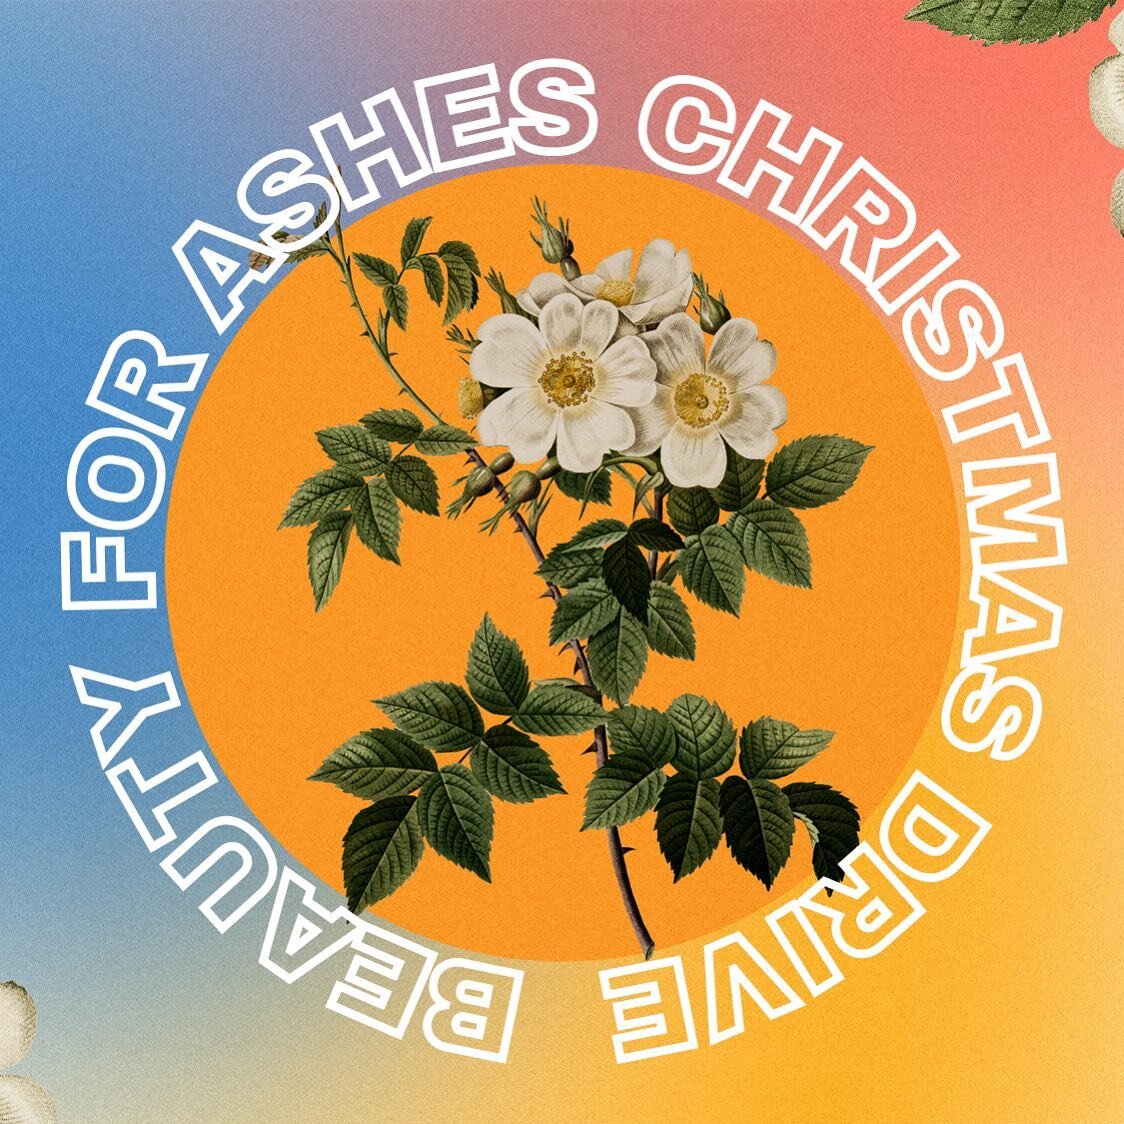 REMINDER:

Our youth Beauty for Ashes Christmas Drive is due this upcoming Sunday, December 4th!!!

We want to provide at least 100 gifts for local inmates this Christmas season! Bring the following items to the youth room this Sunday:

Legal Pads (2